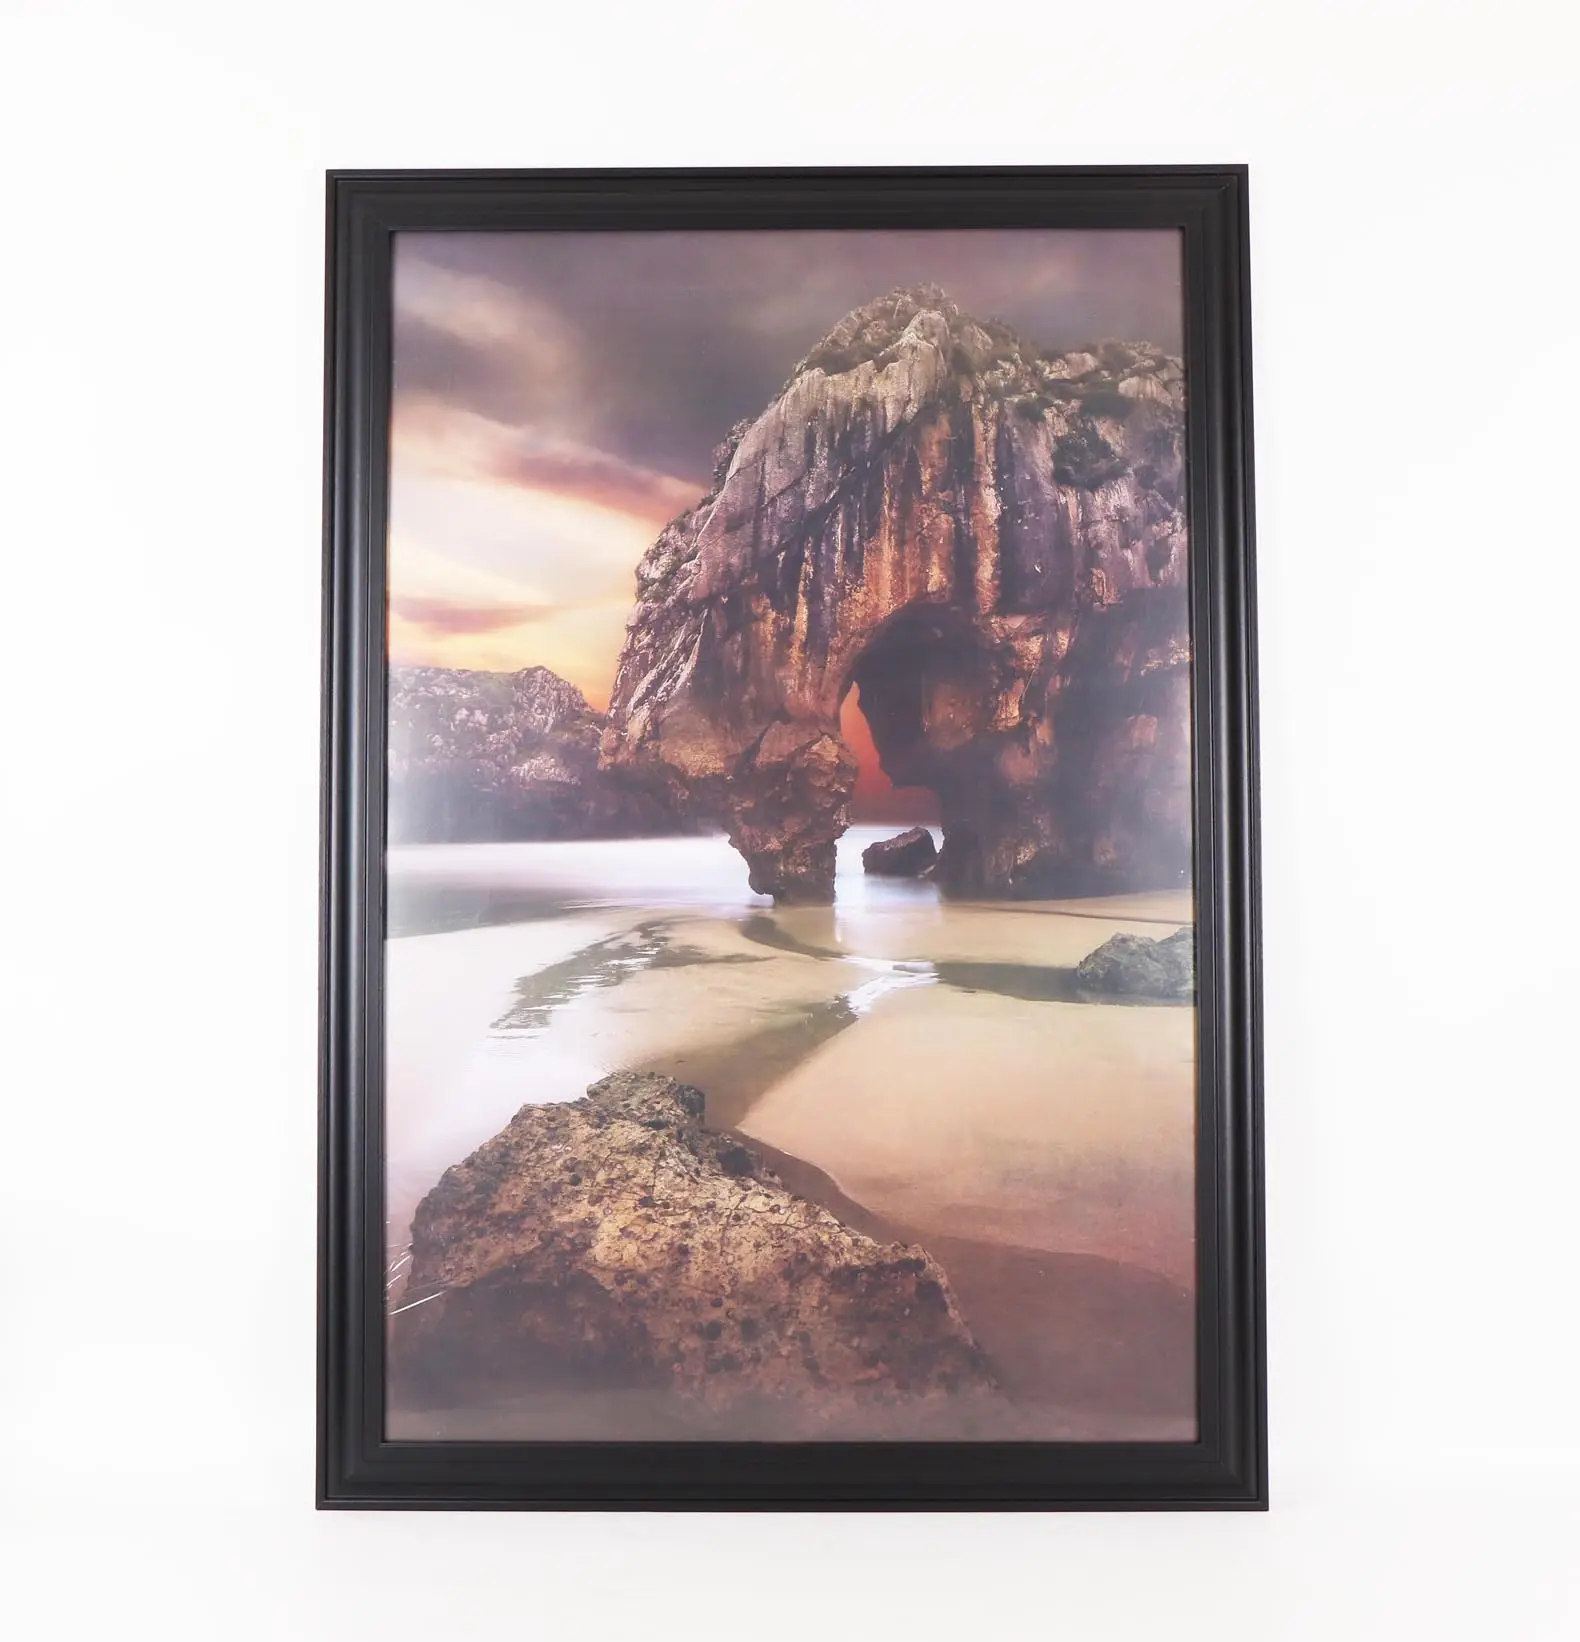 24x36" picture frame, MDF gallery frame for Museum, Large size art frame